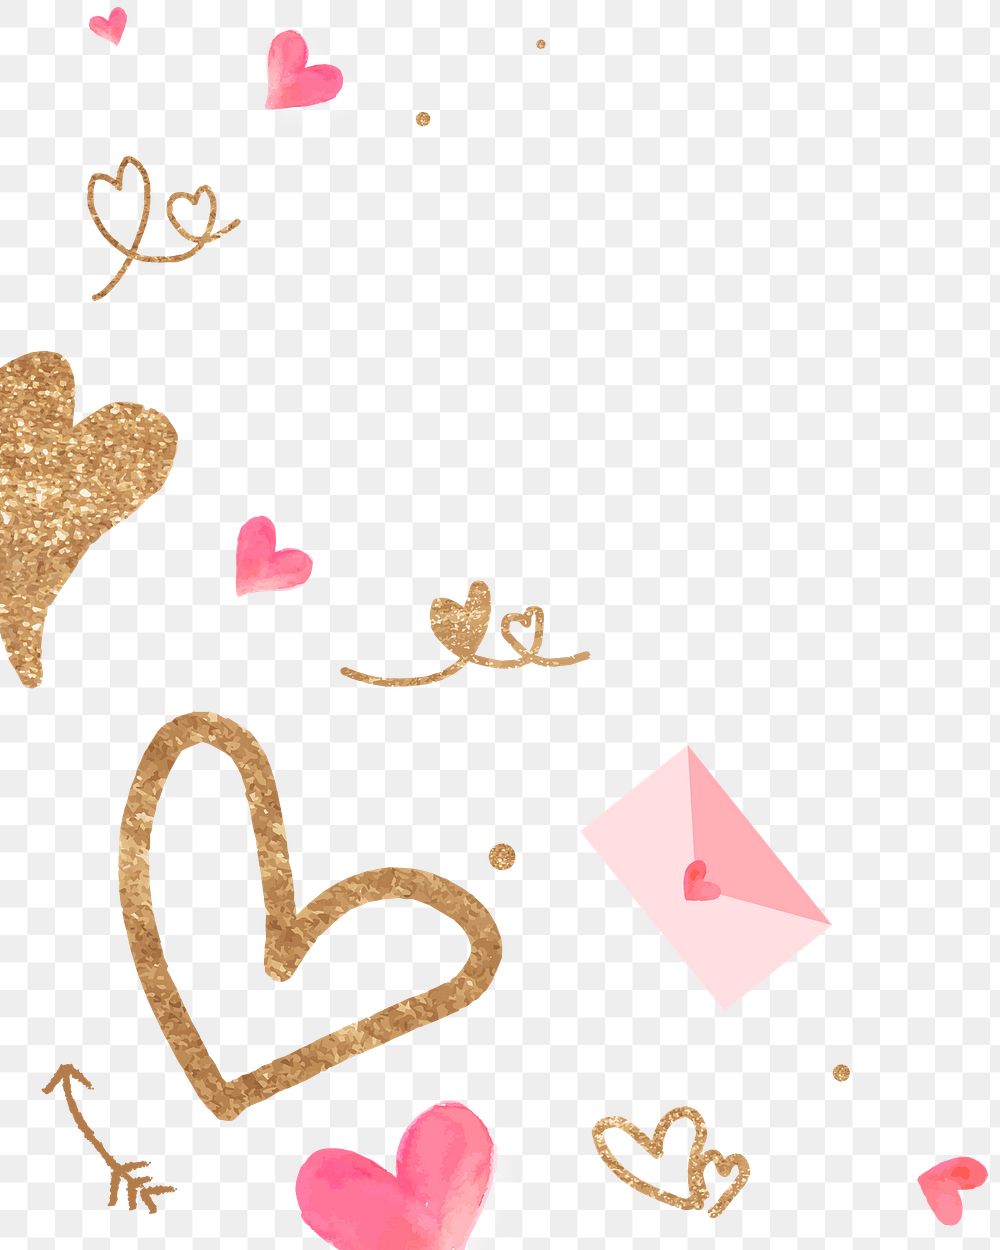 Valentine&rsquo;s glittery heart border png transparent background